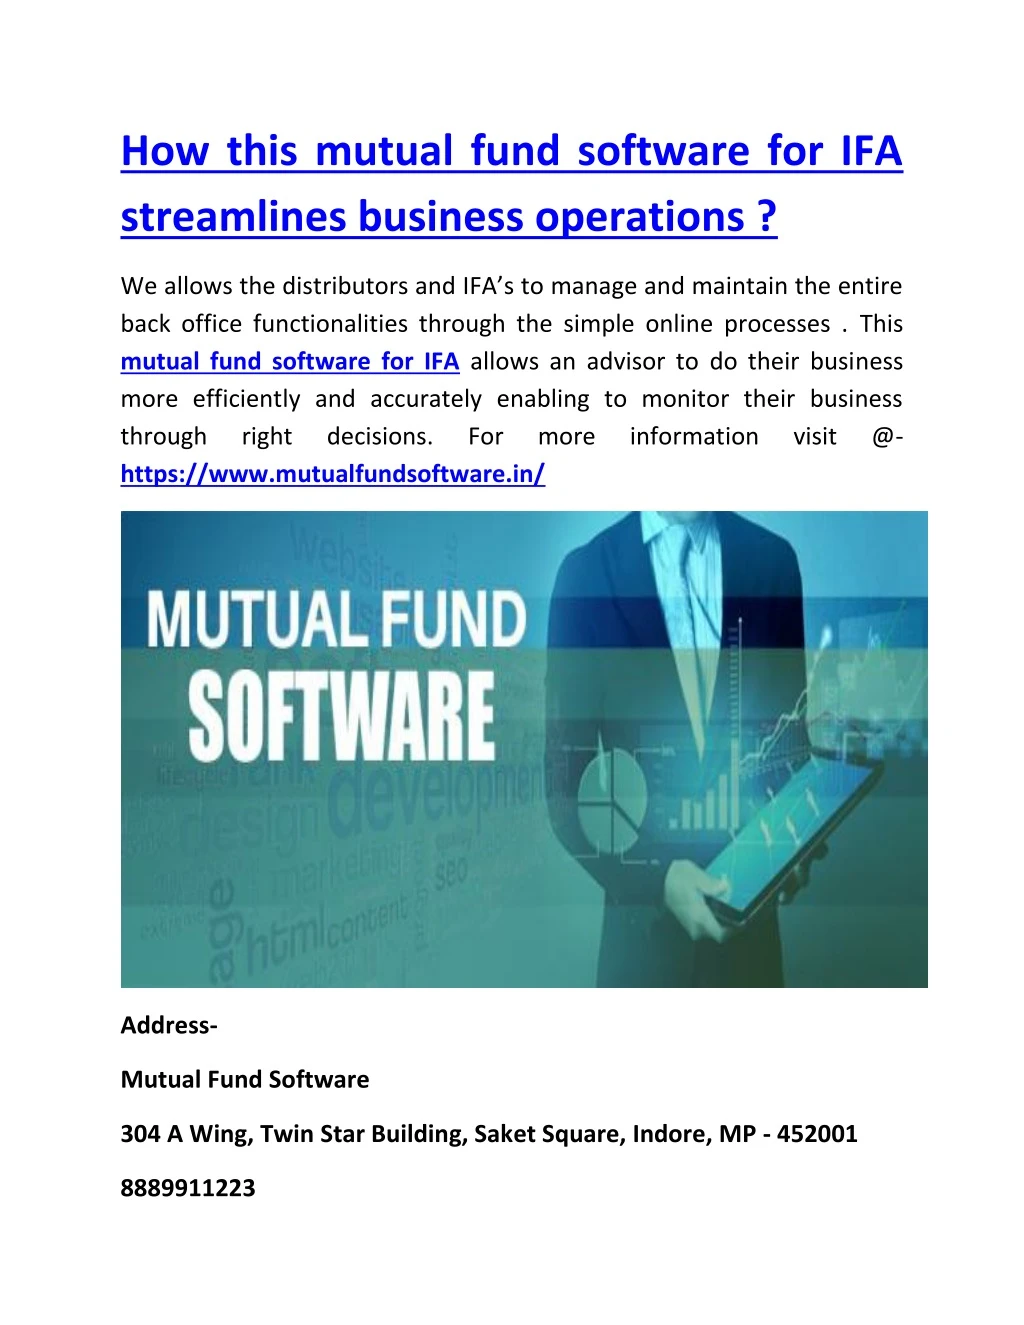 how this mutual fund software for ifa streamlines